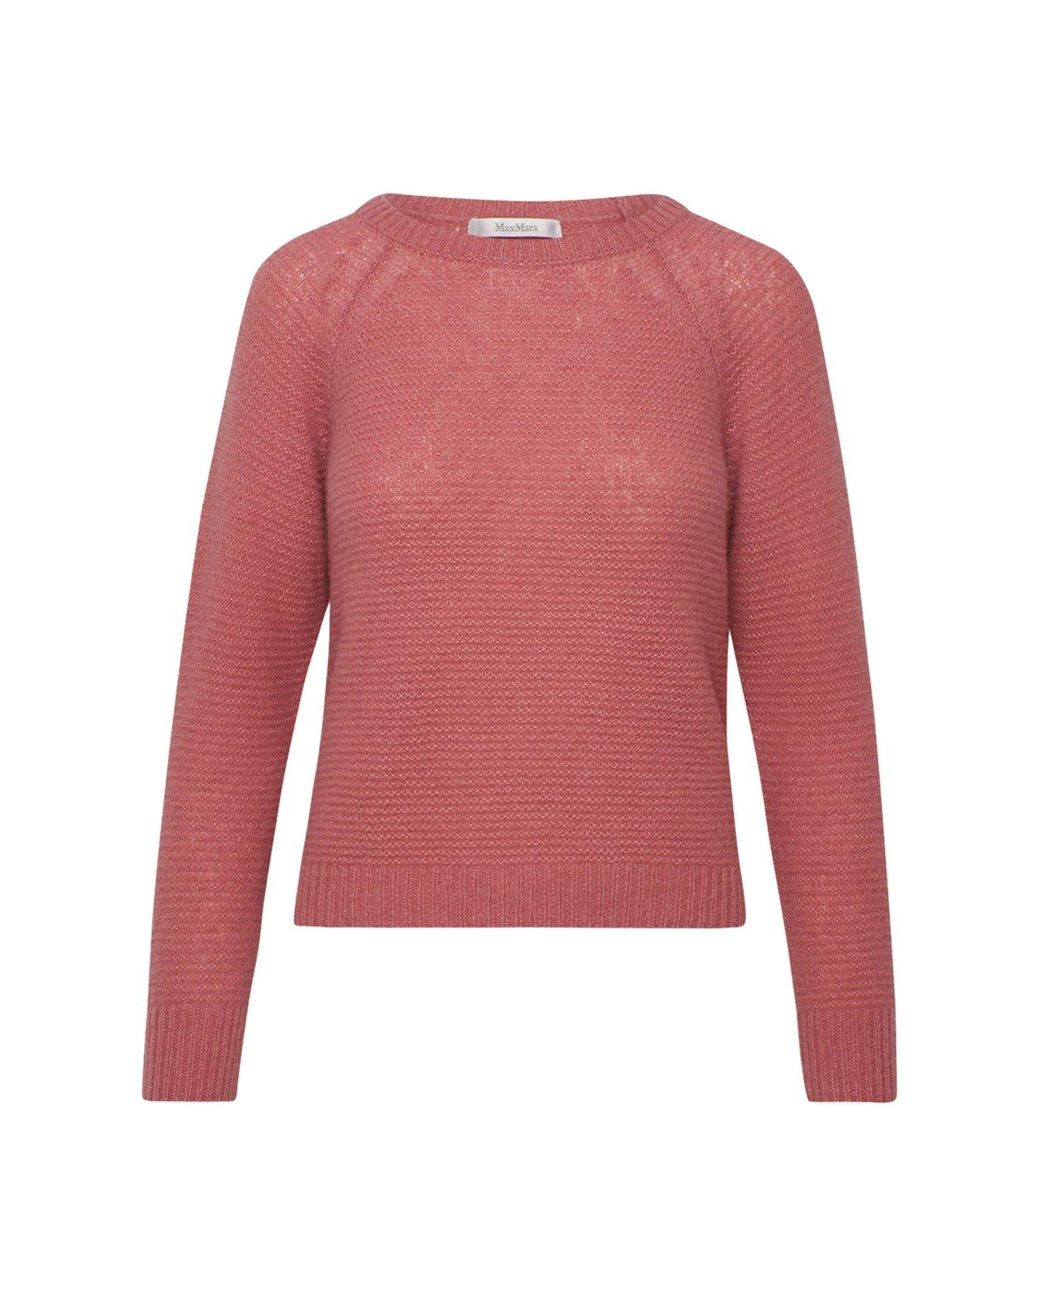 Max Mara Cashmere Crewneck Knitted Sweater in Pink - Save 26% - Lyst